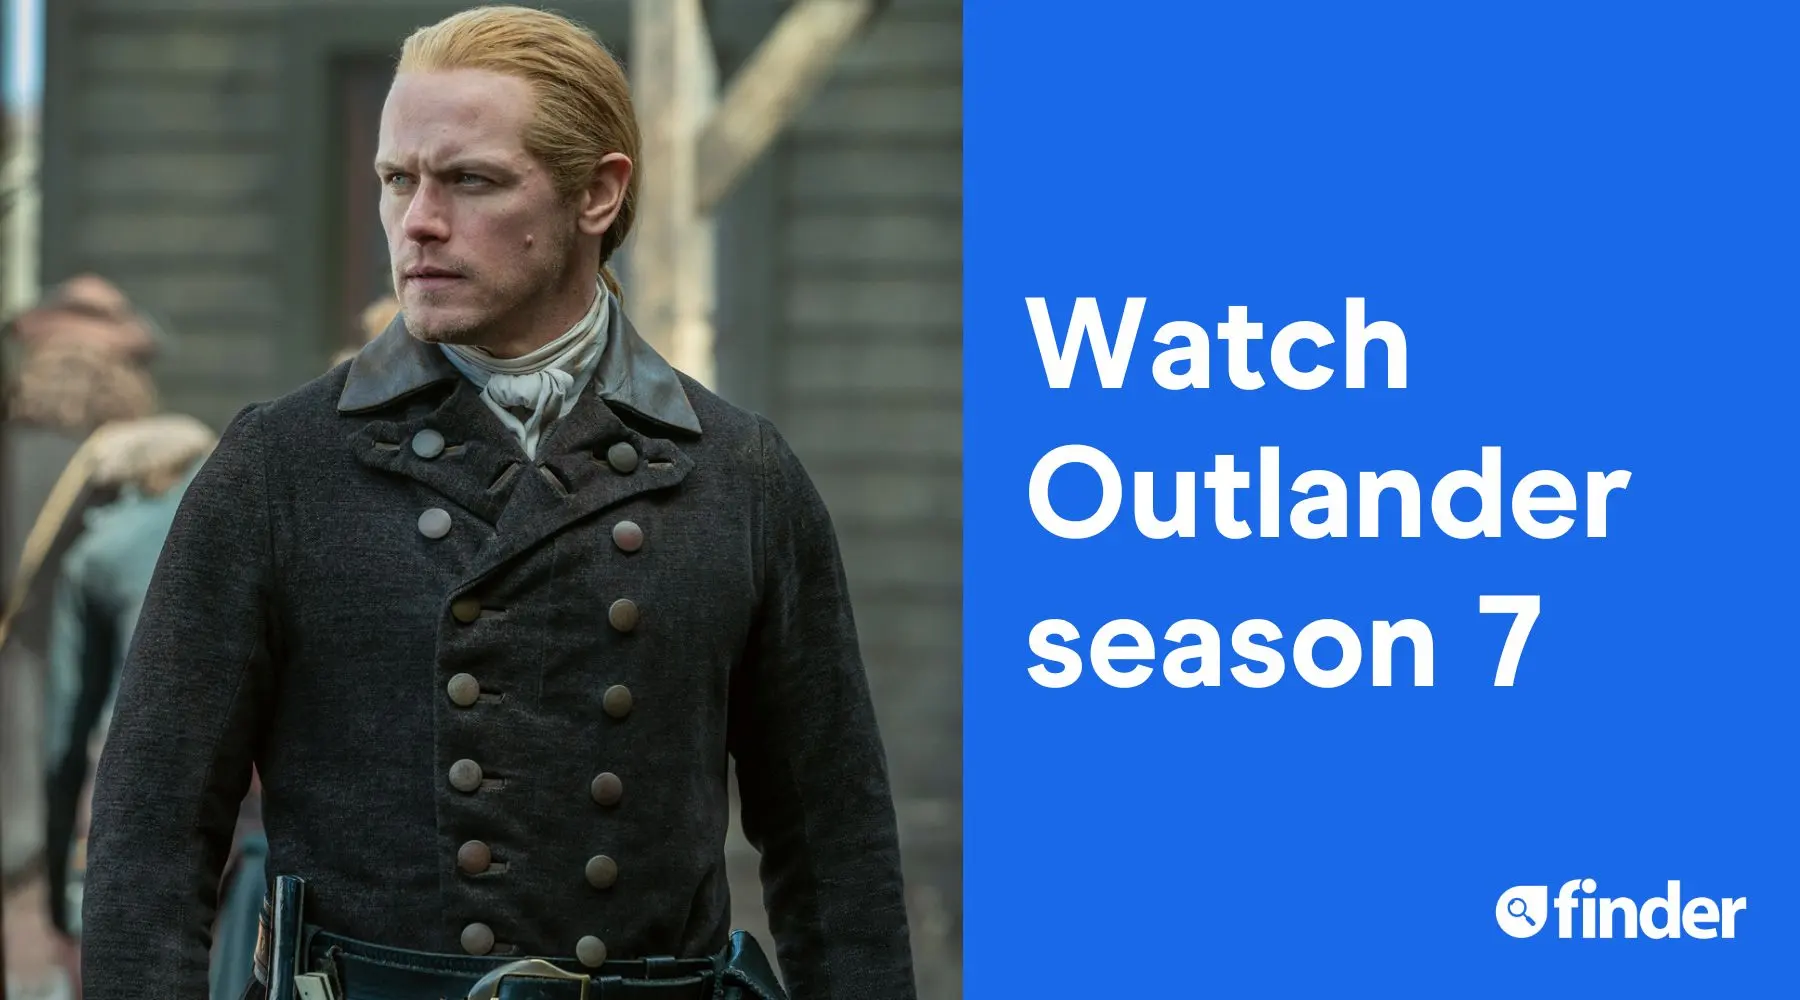 Outlander season 7: Preview, schedule and stream options